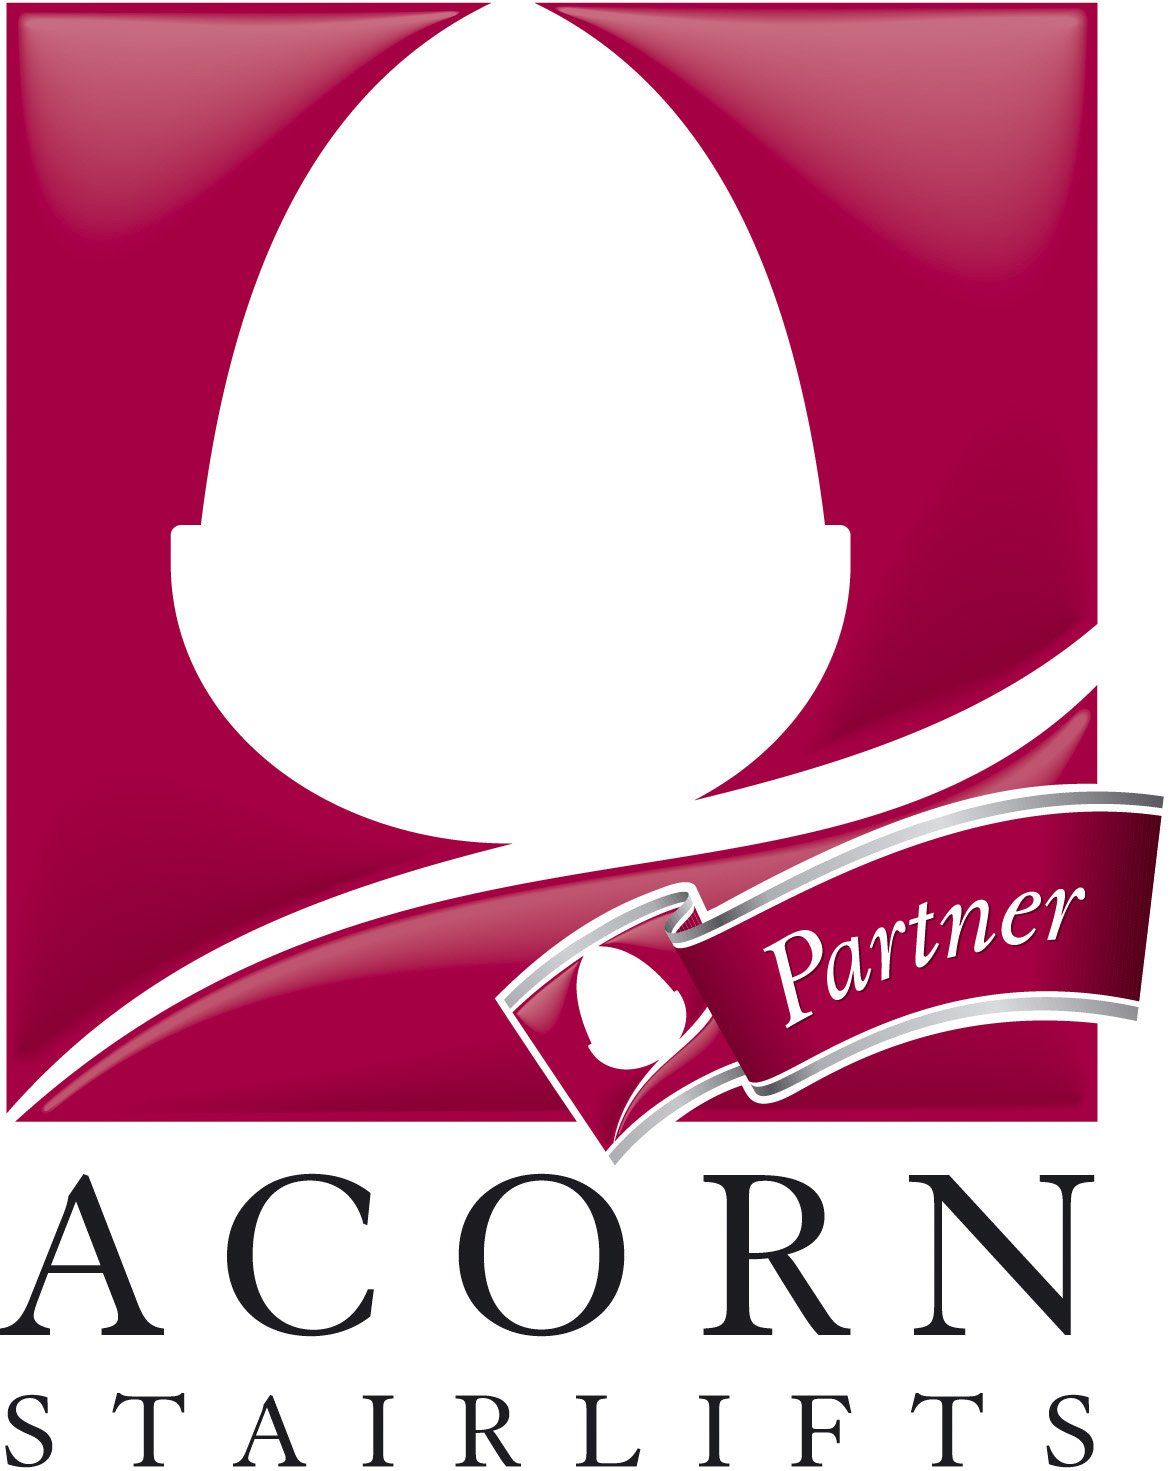 Acorn Stairlifts Birmingham - Helping Hand Stairlifts